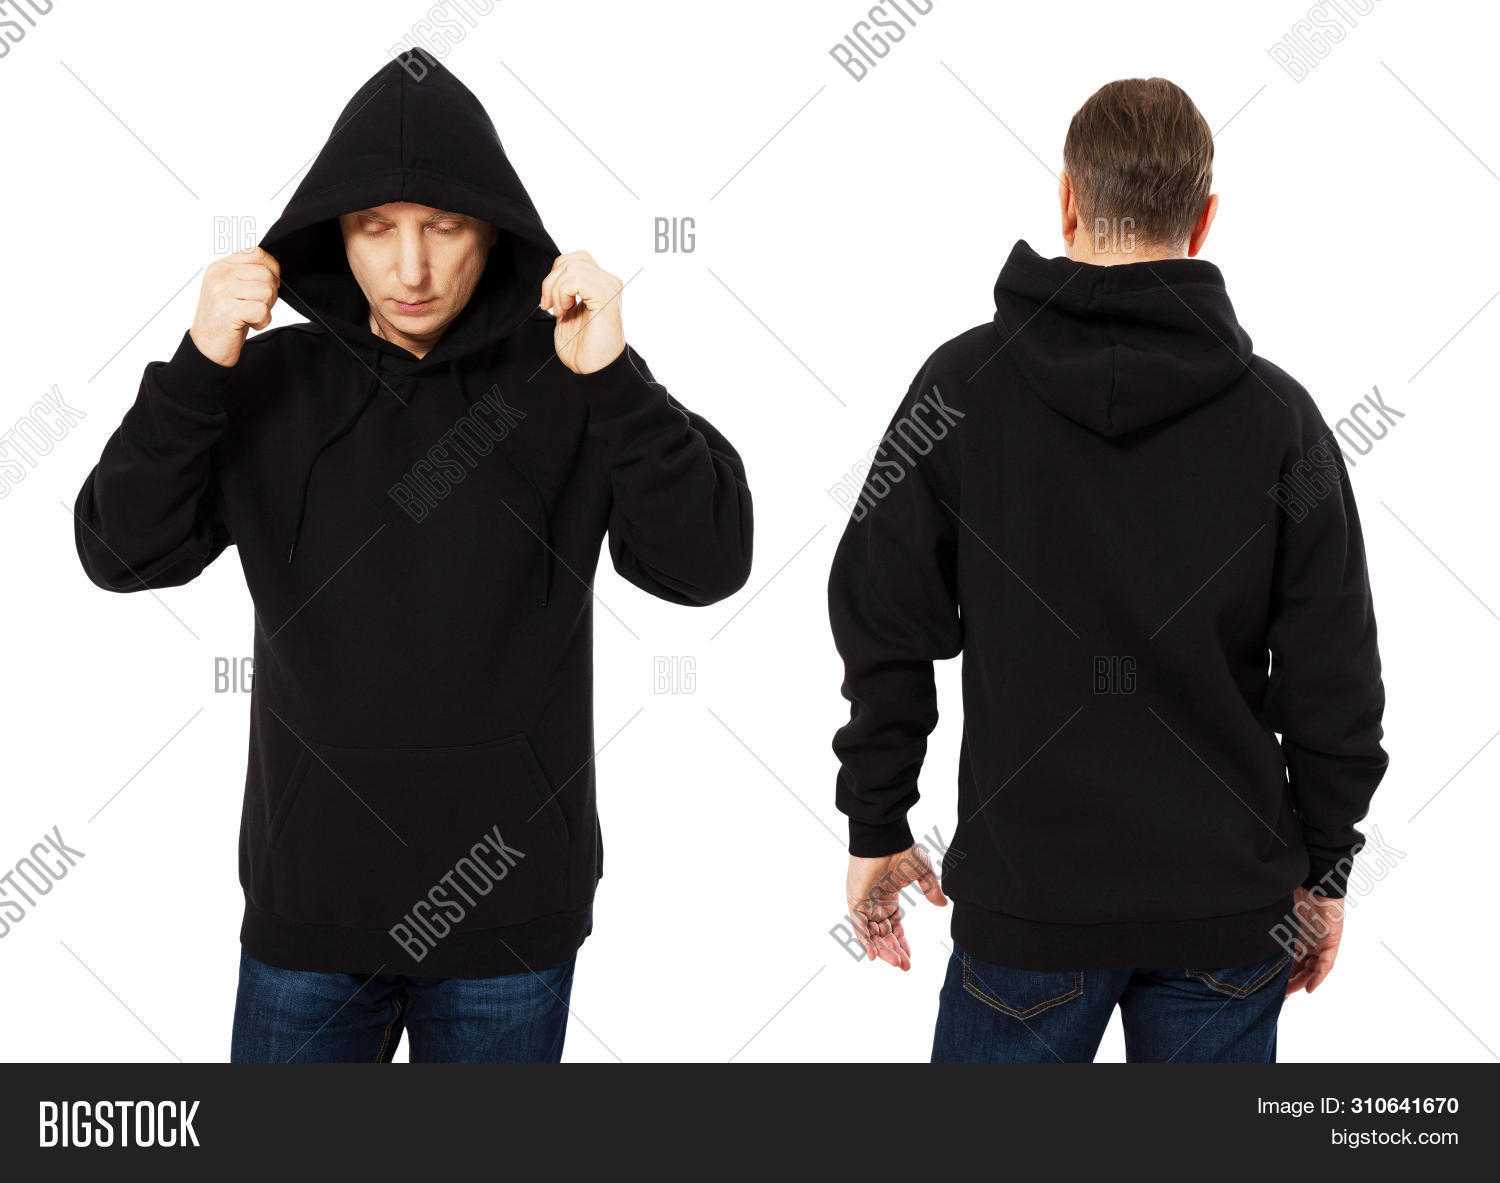 Man Template Mens Image & Photo (Free Trial) | Bigstock With Blank Black Hoodie Template